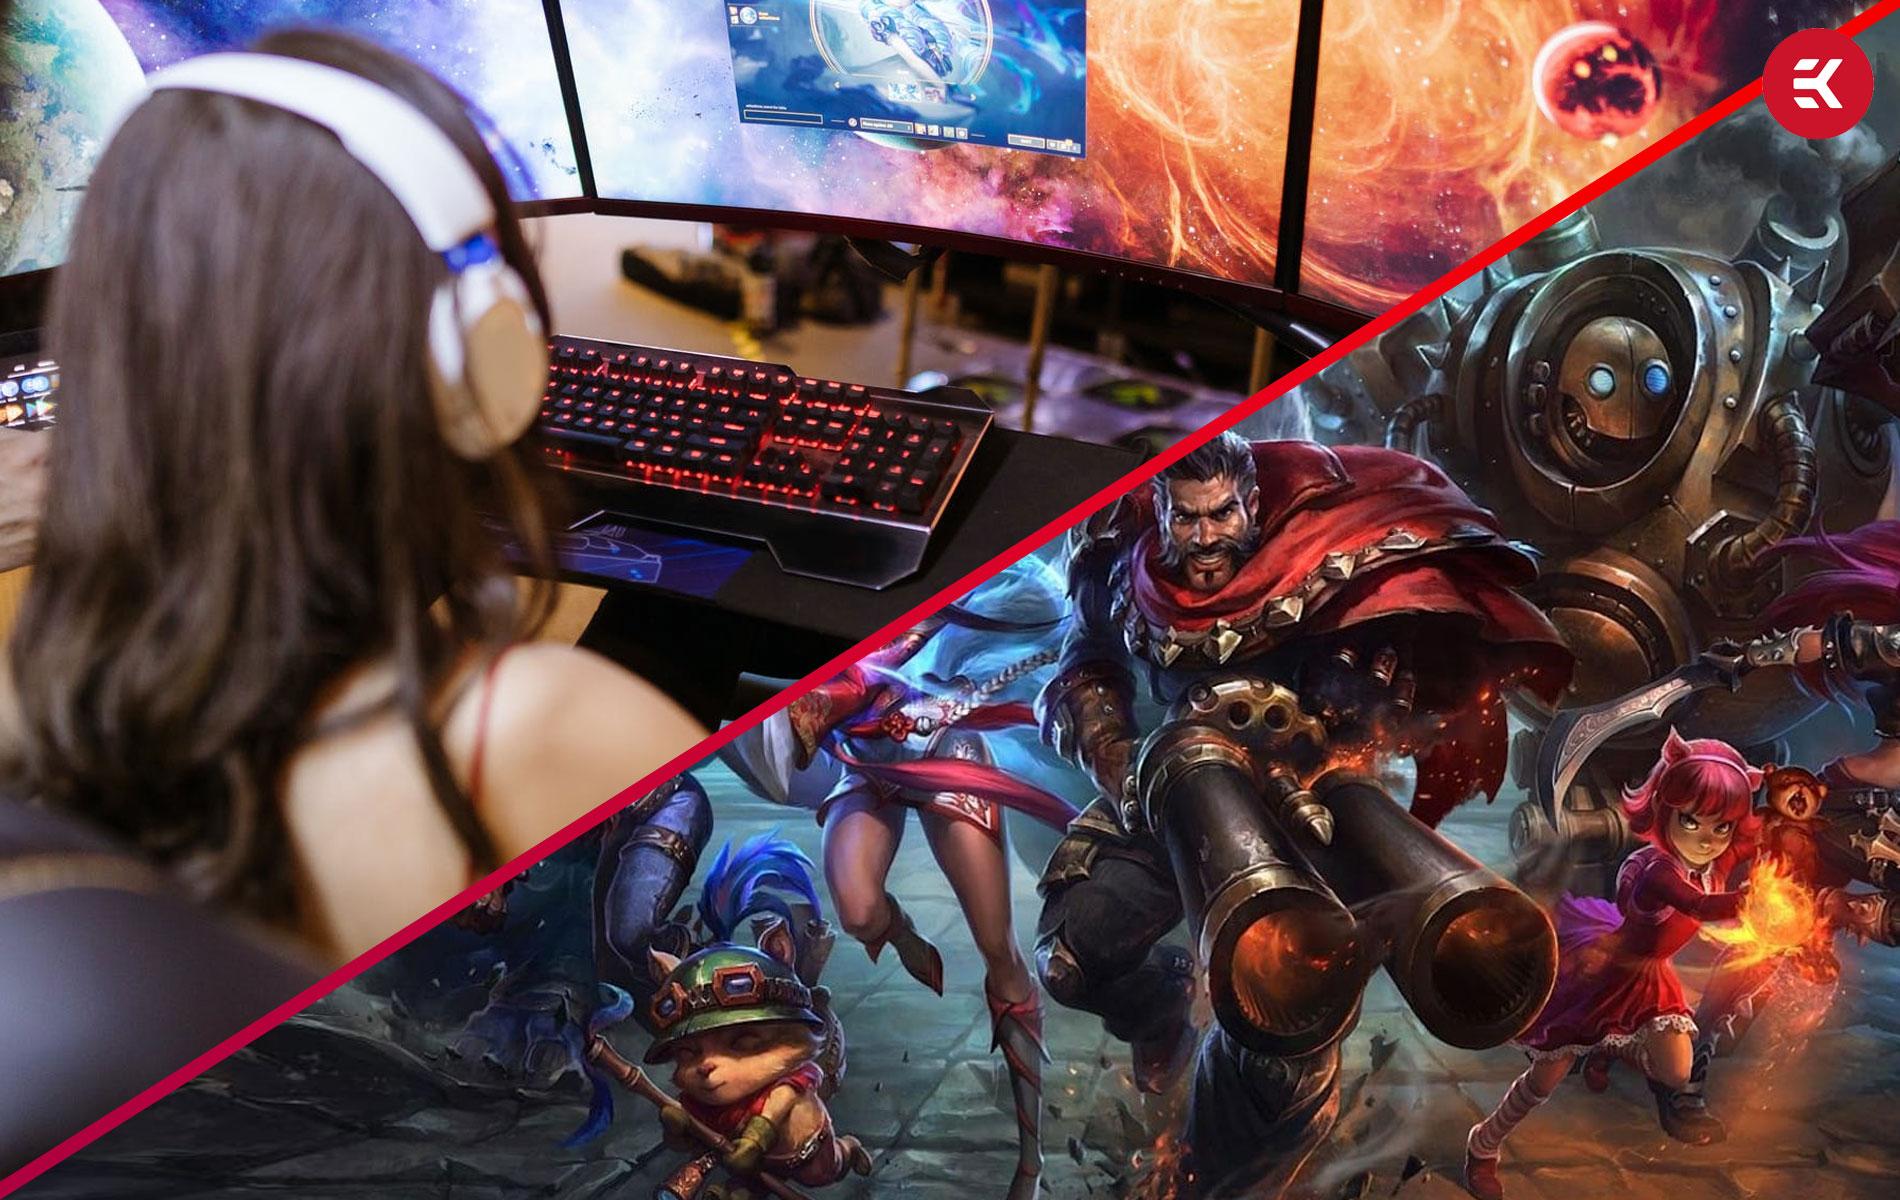 The Best Gaming PC For League of Legends in 2022